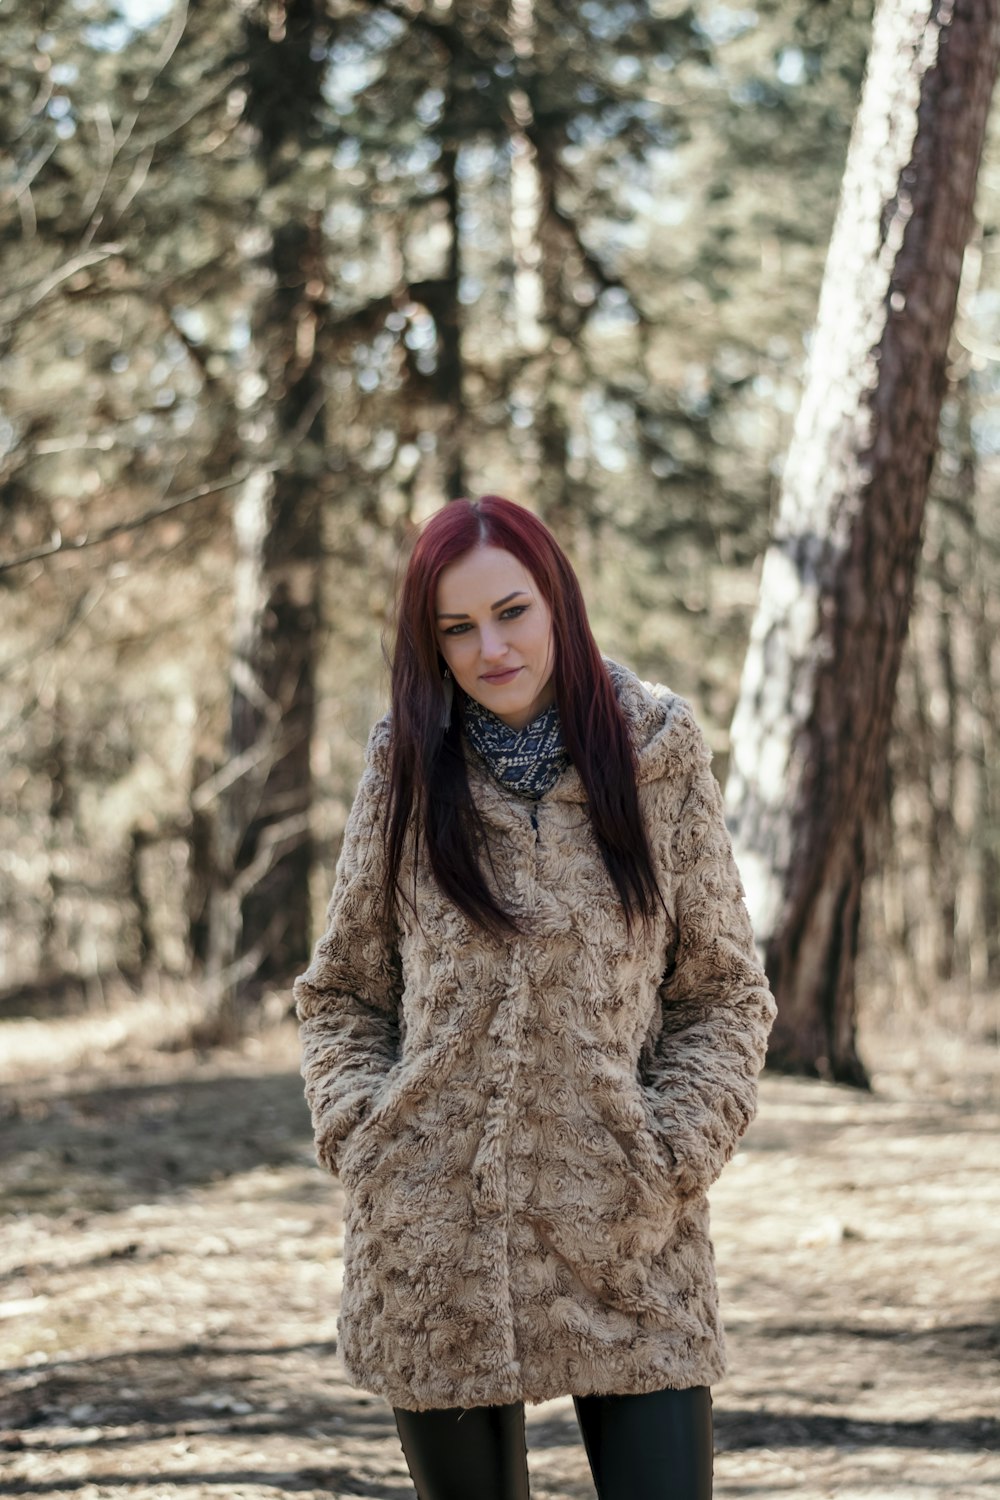 focus photography of woman wearing fur coat standing near trees during daytime